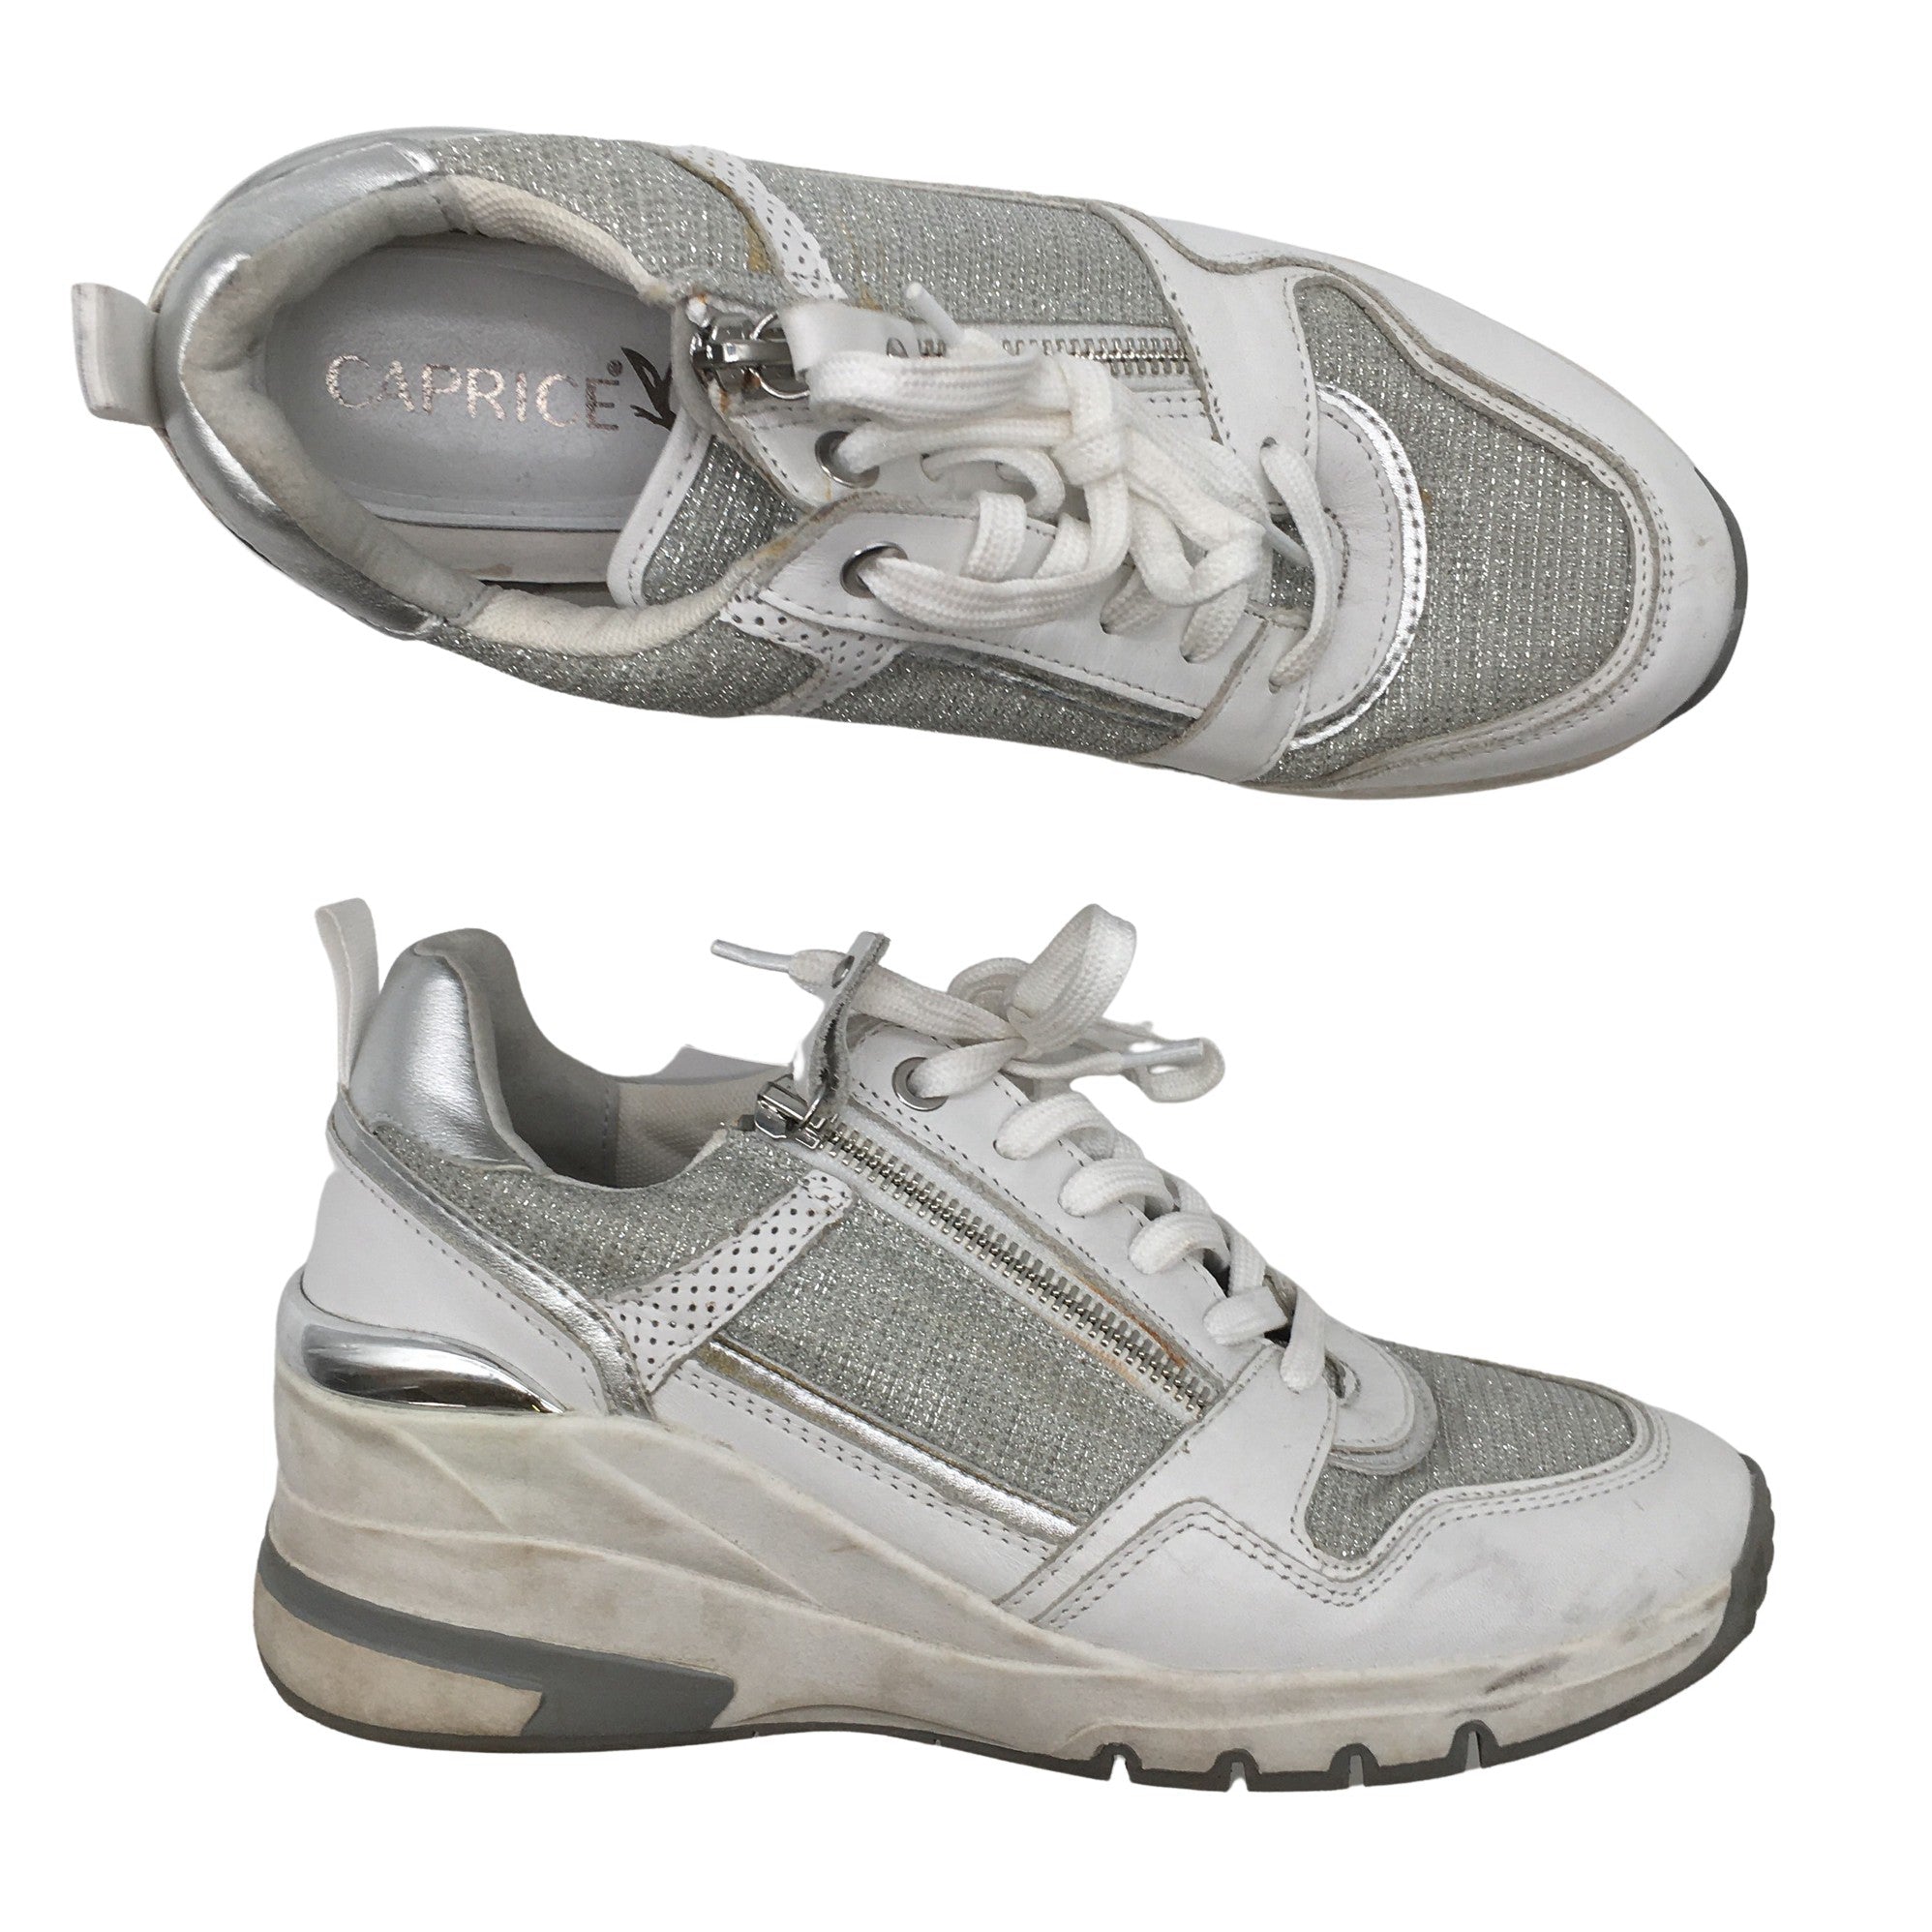 Caprice sneakers, size 38 (Grey) | Emmy